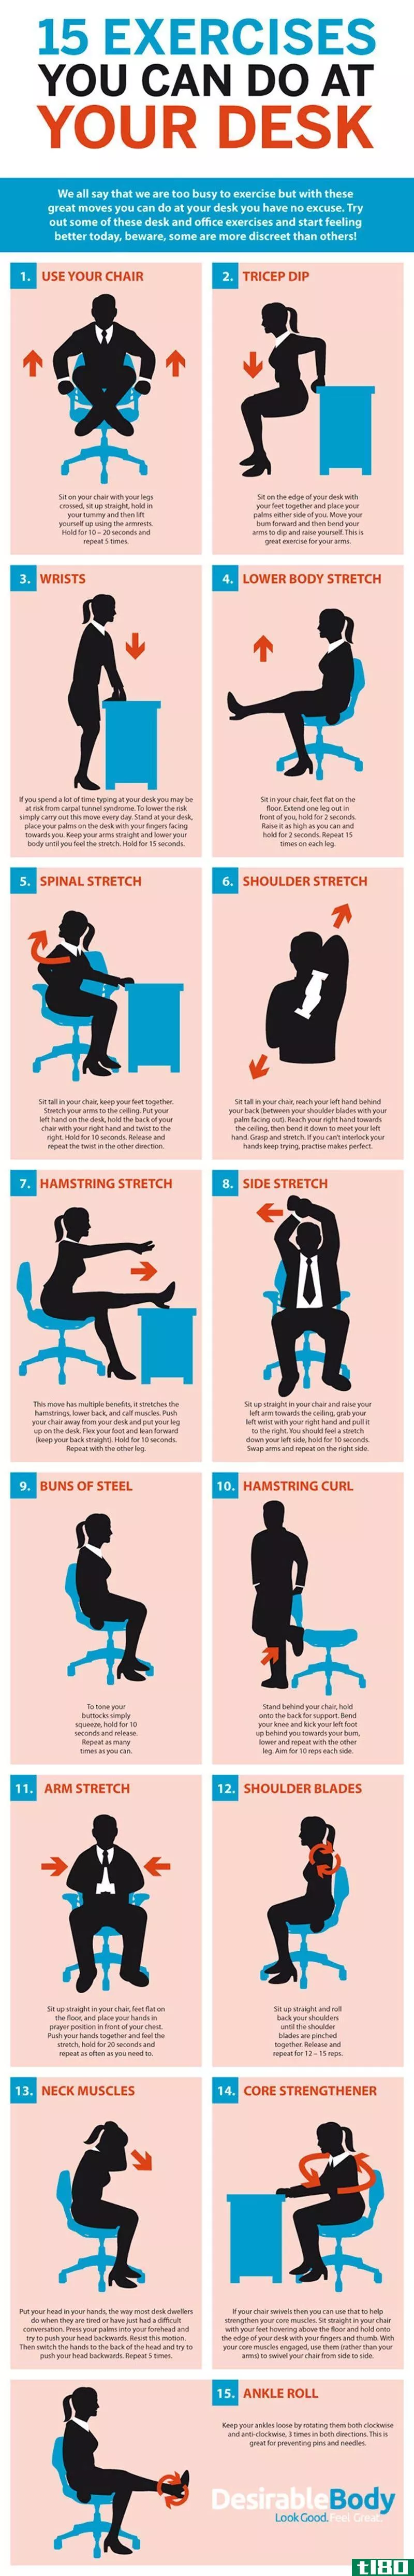 Illustration for article titled This Graphic Shows Bunch of Desk-Based Exercises for the Office